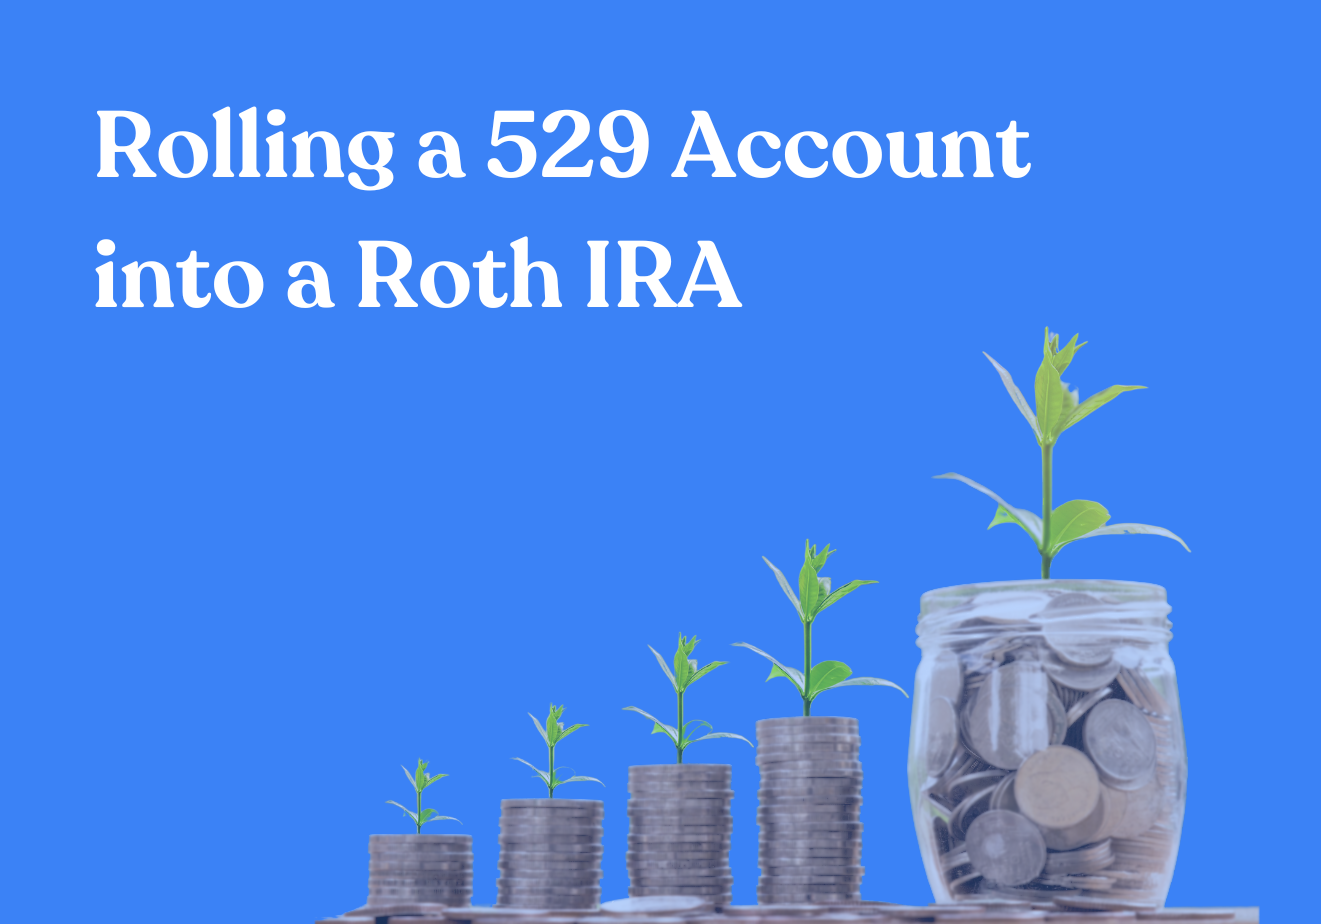 Rolling a 529 Account into a Roth IRA